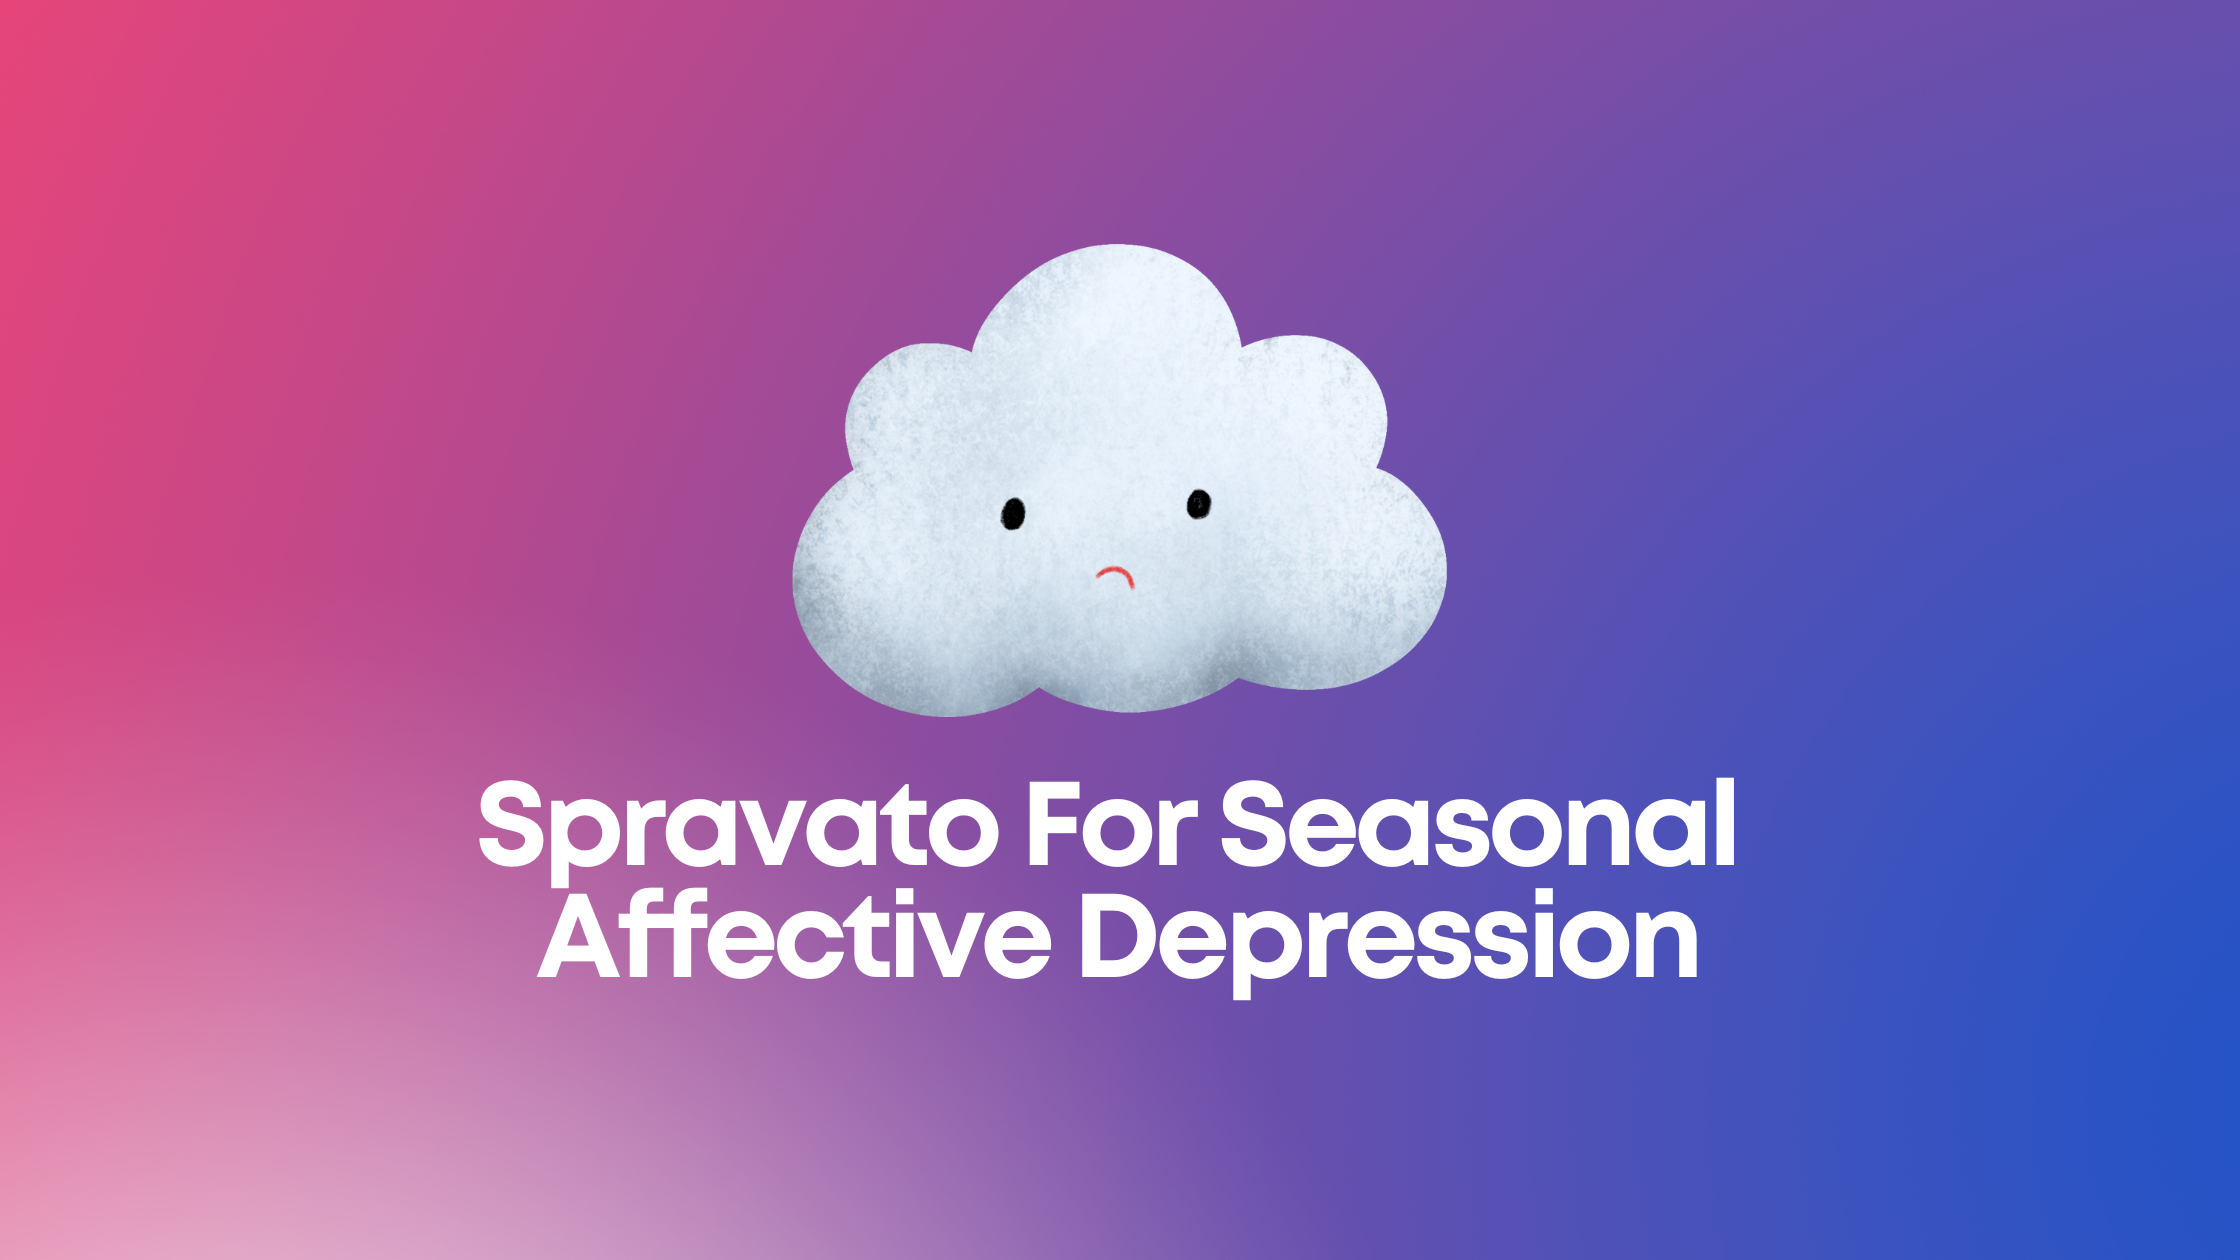 You are currently viewing Spravato For Seasonal Affective Depression